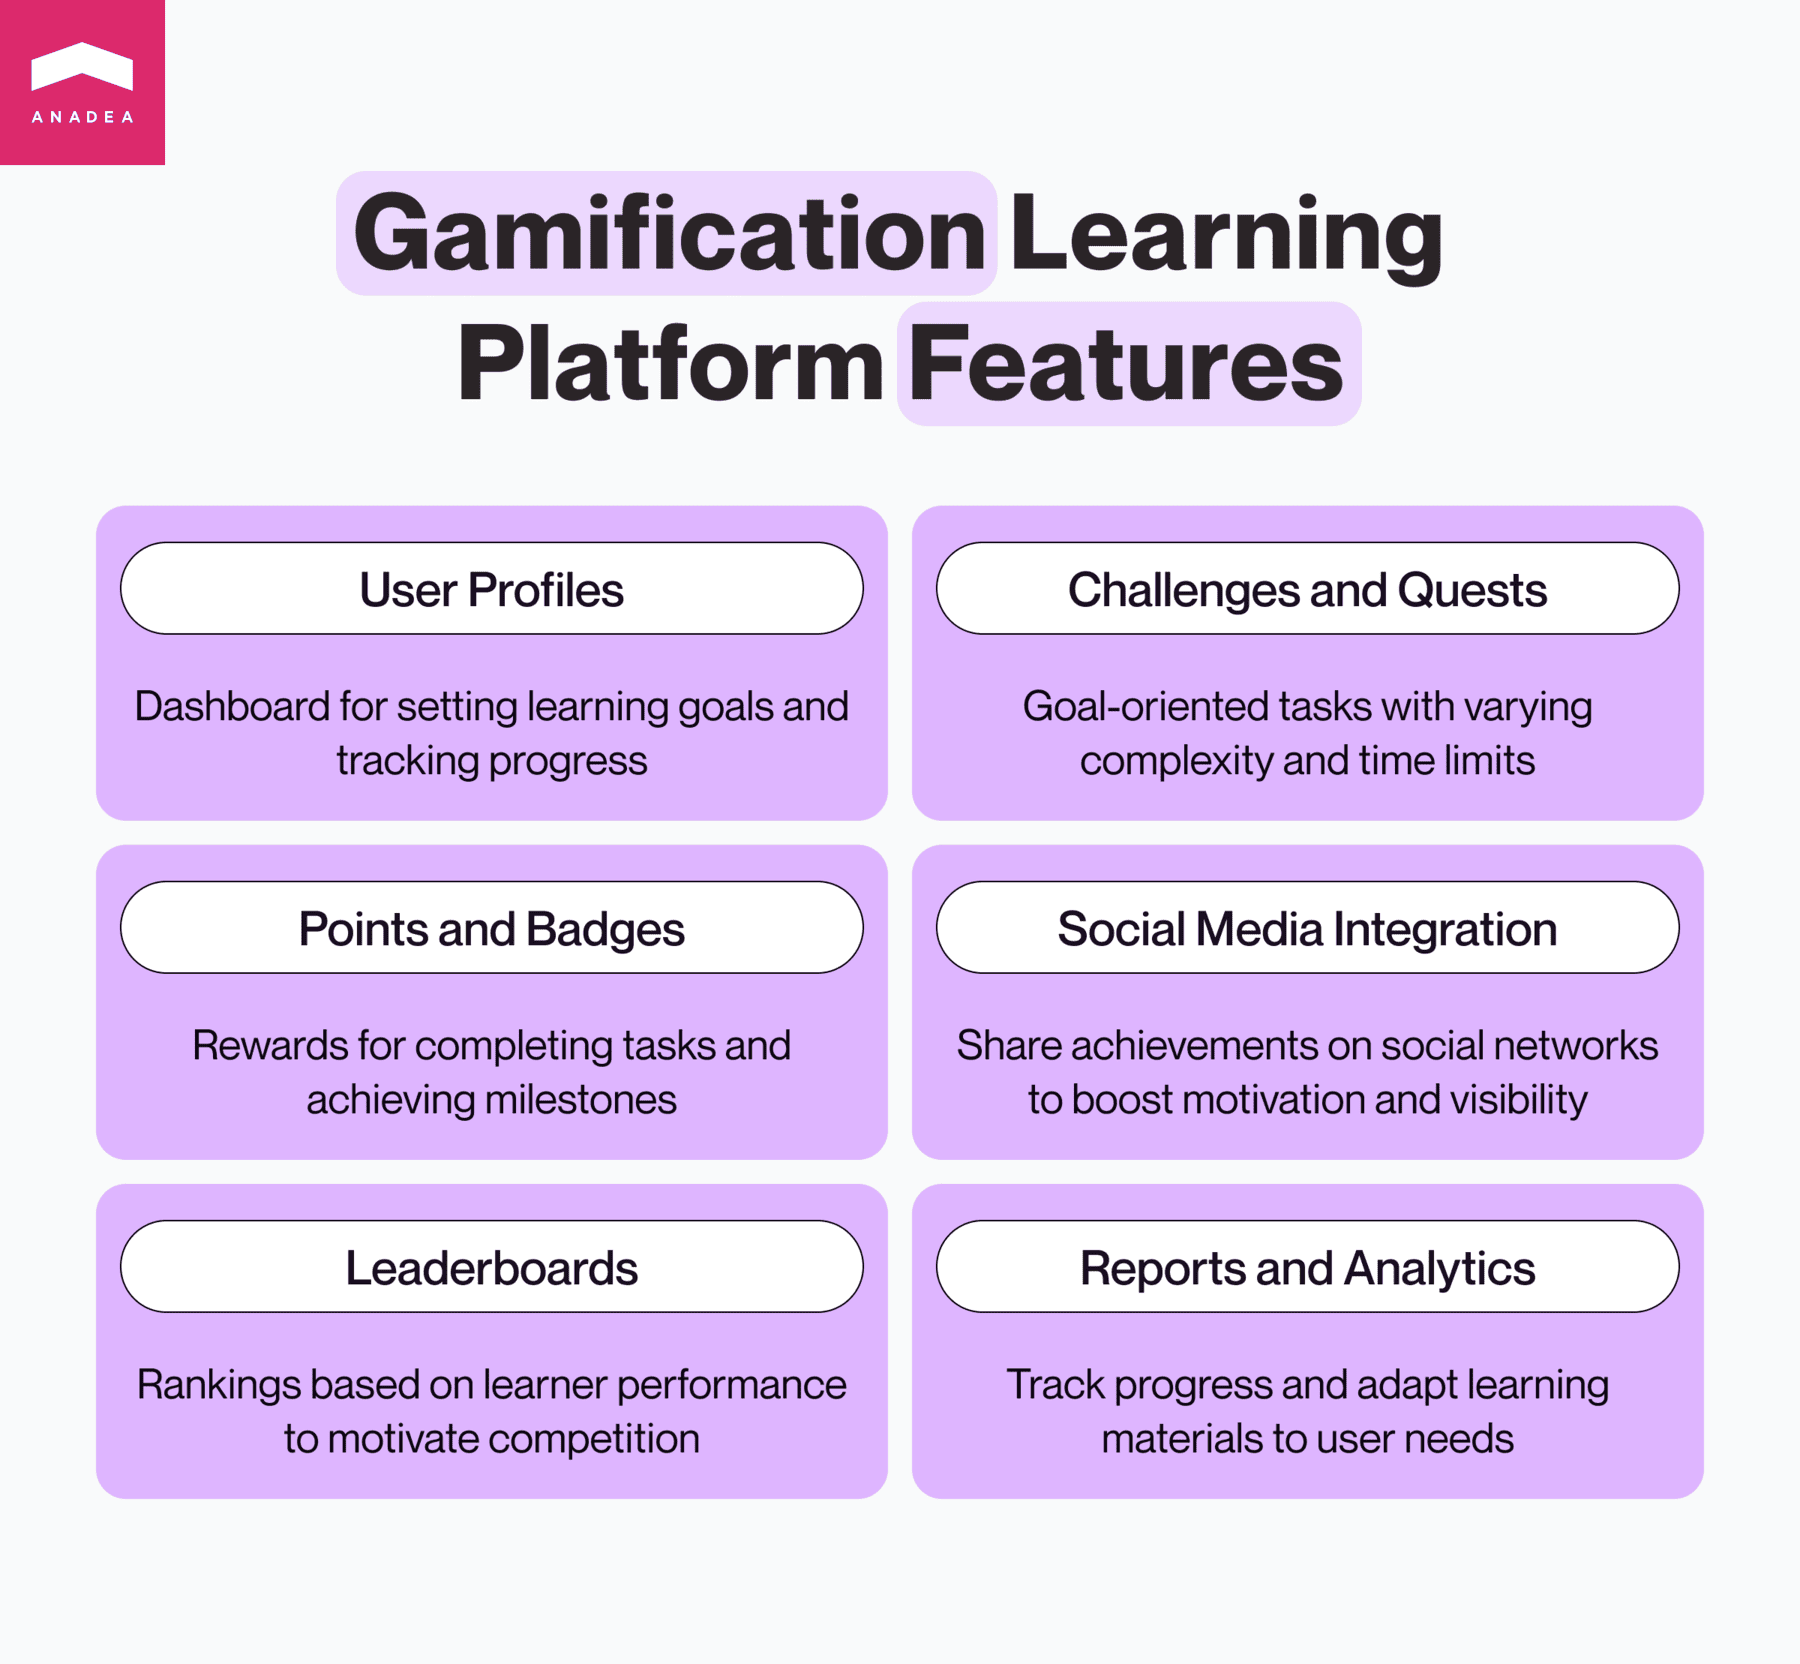 Features of gamification learning platform